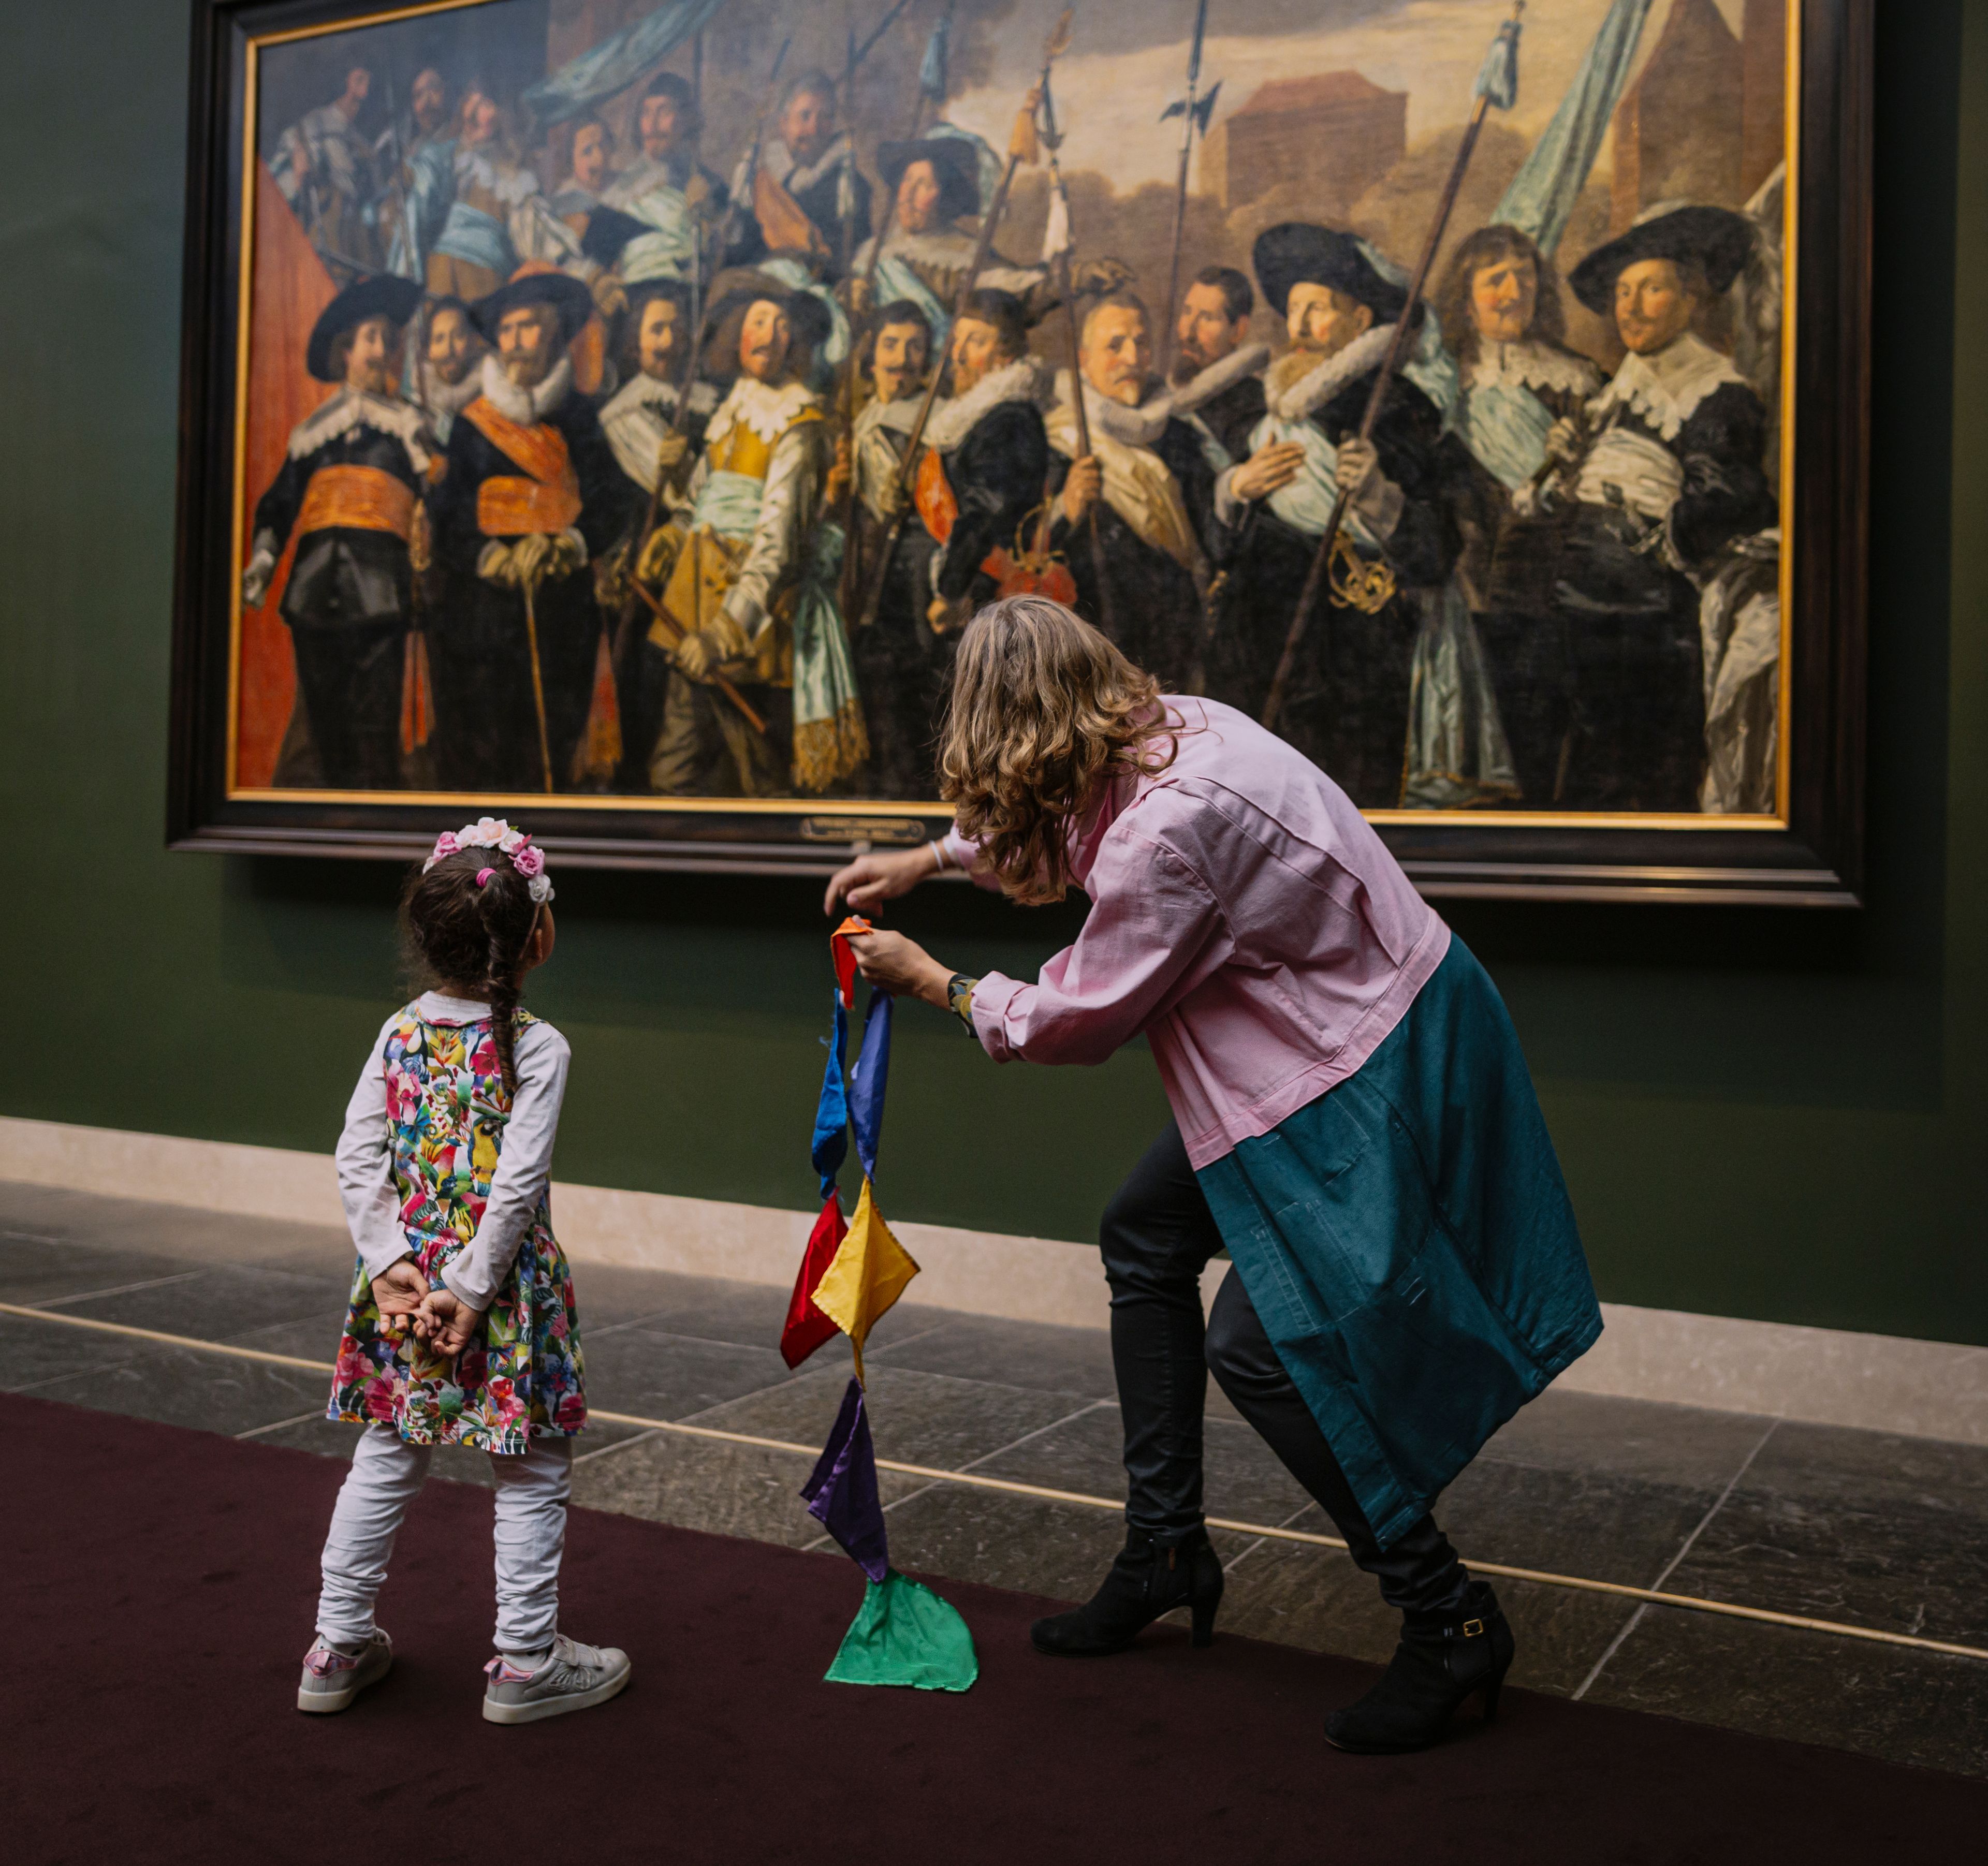 Guided tour Sjaak Suppoost, child measures the largest painting in the Frans Hals Museum together with the tour guide.